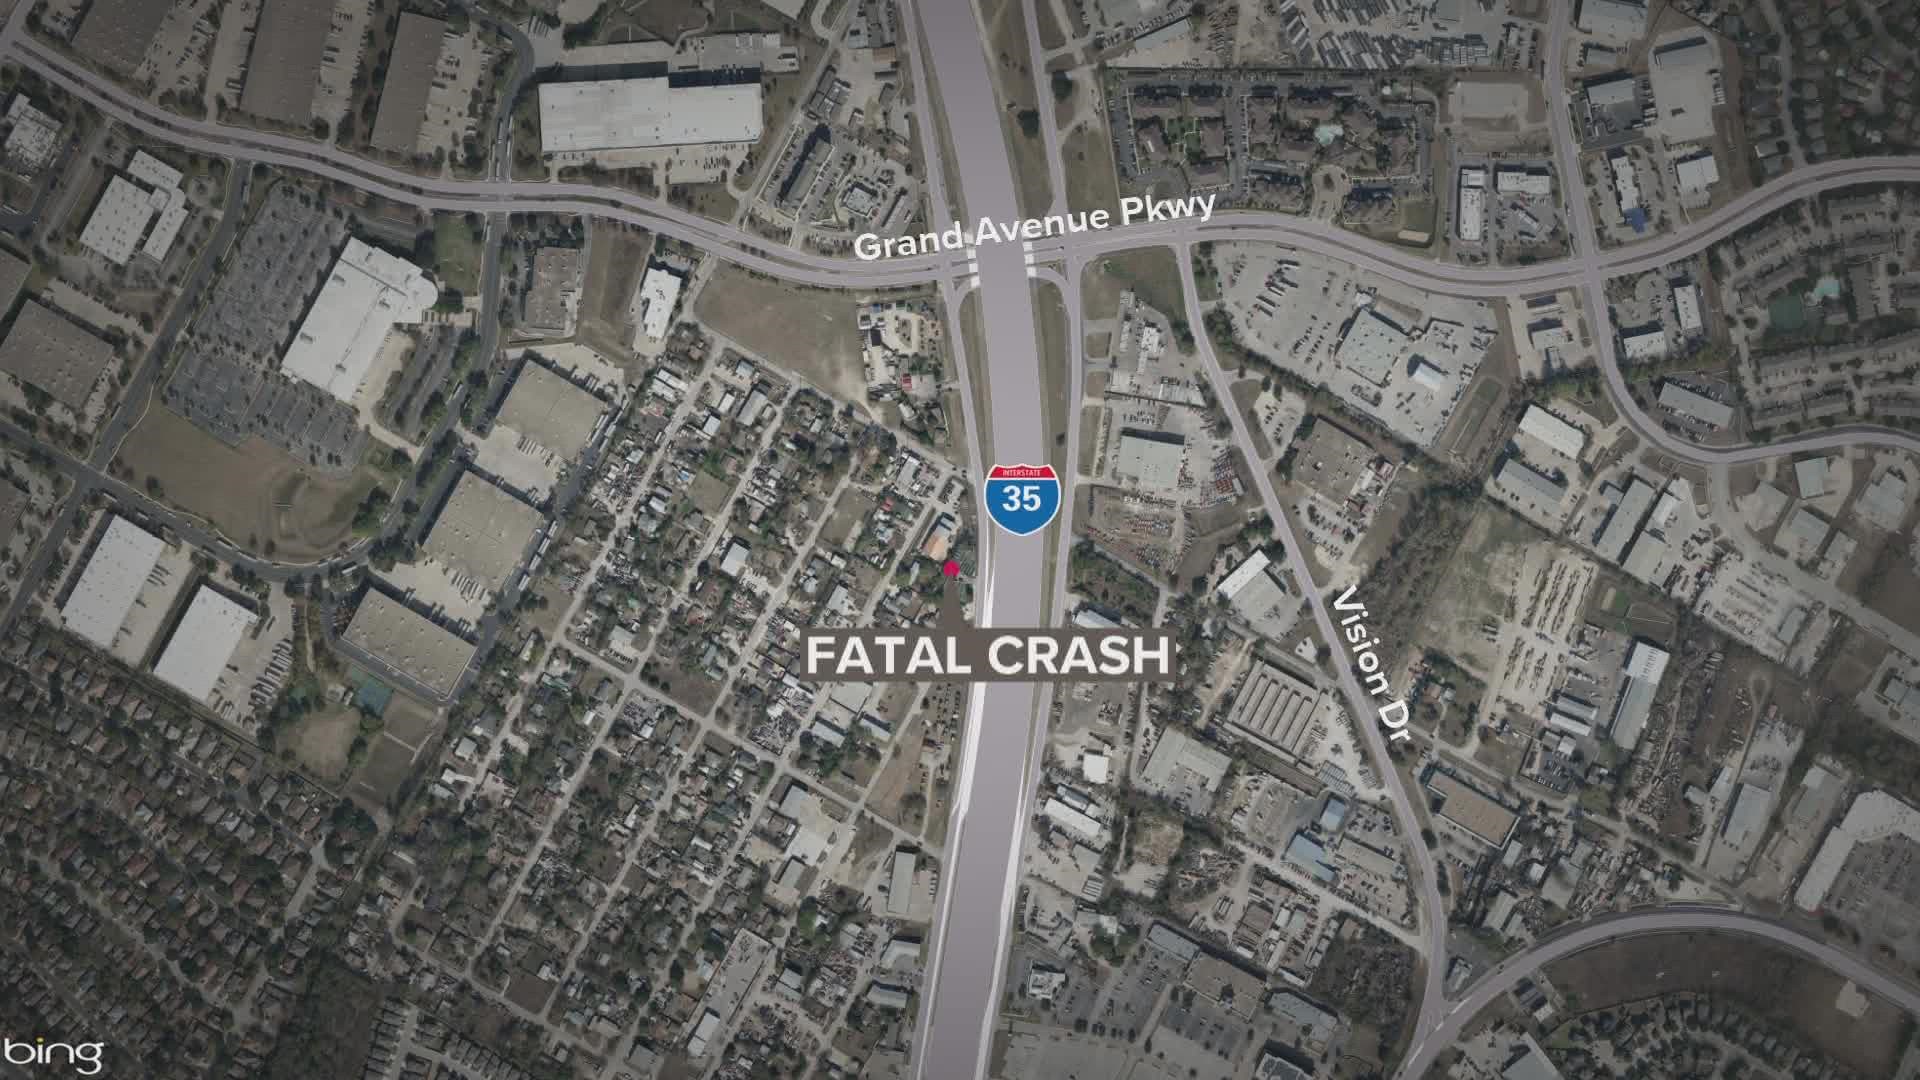 The crash happened off of I-35 near Grand Avenue Parkway.